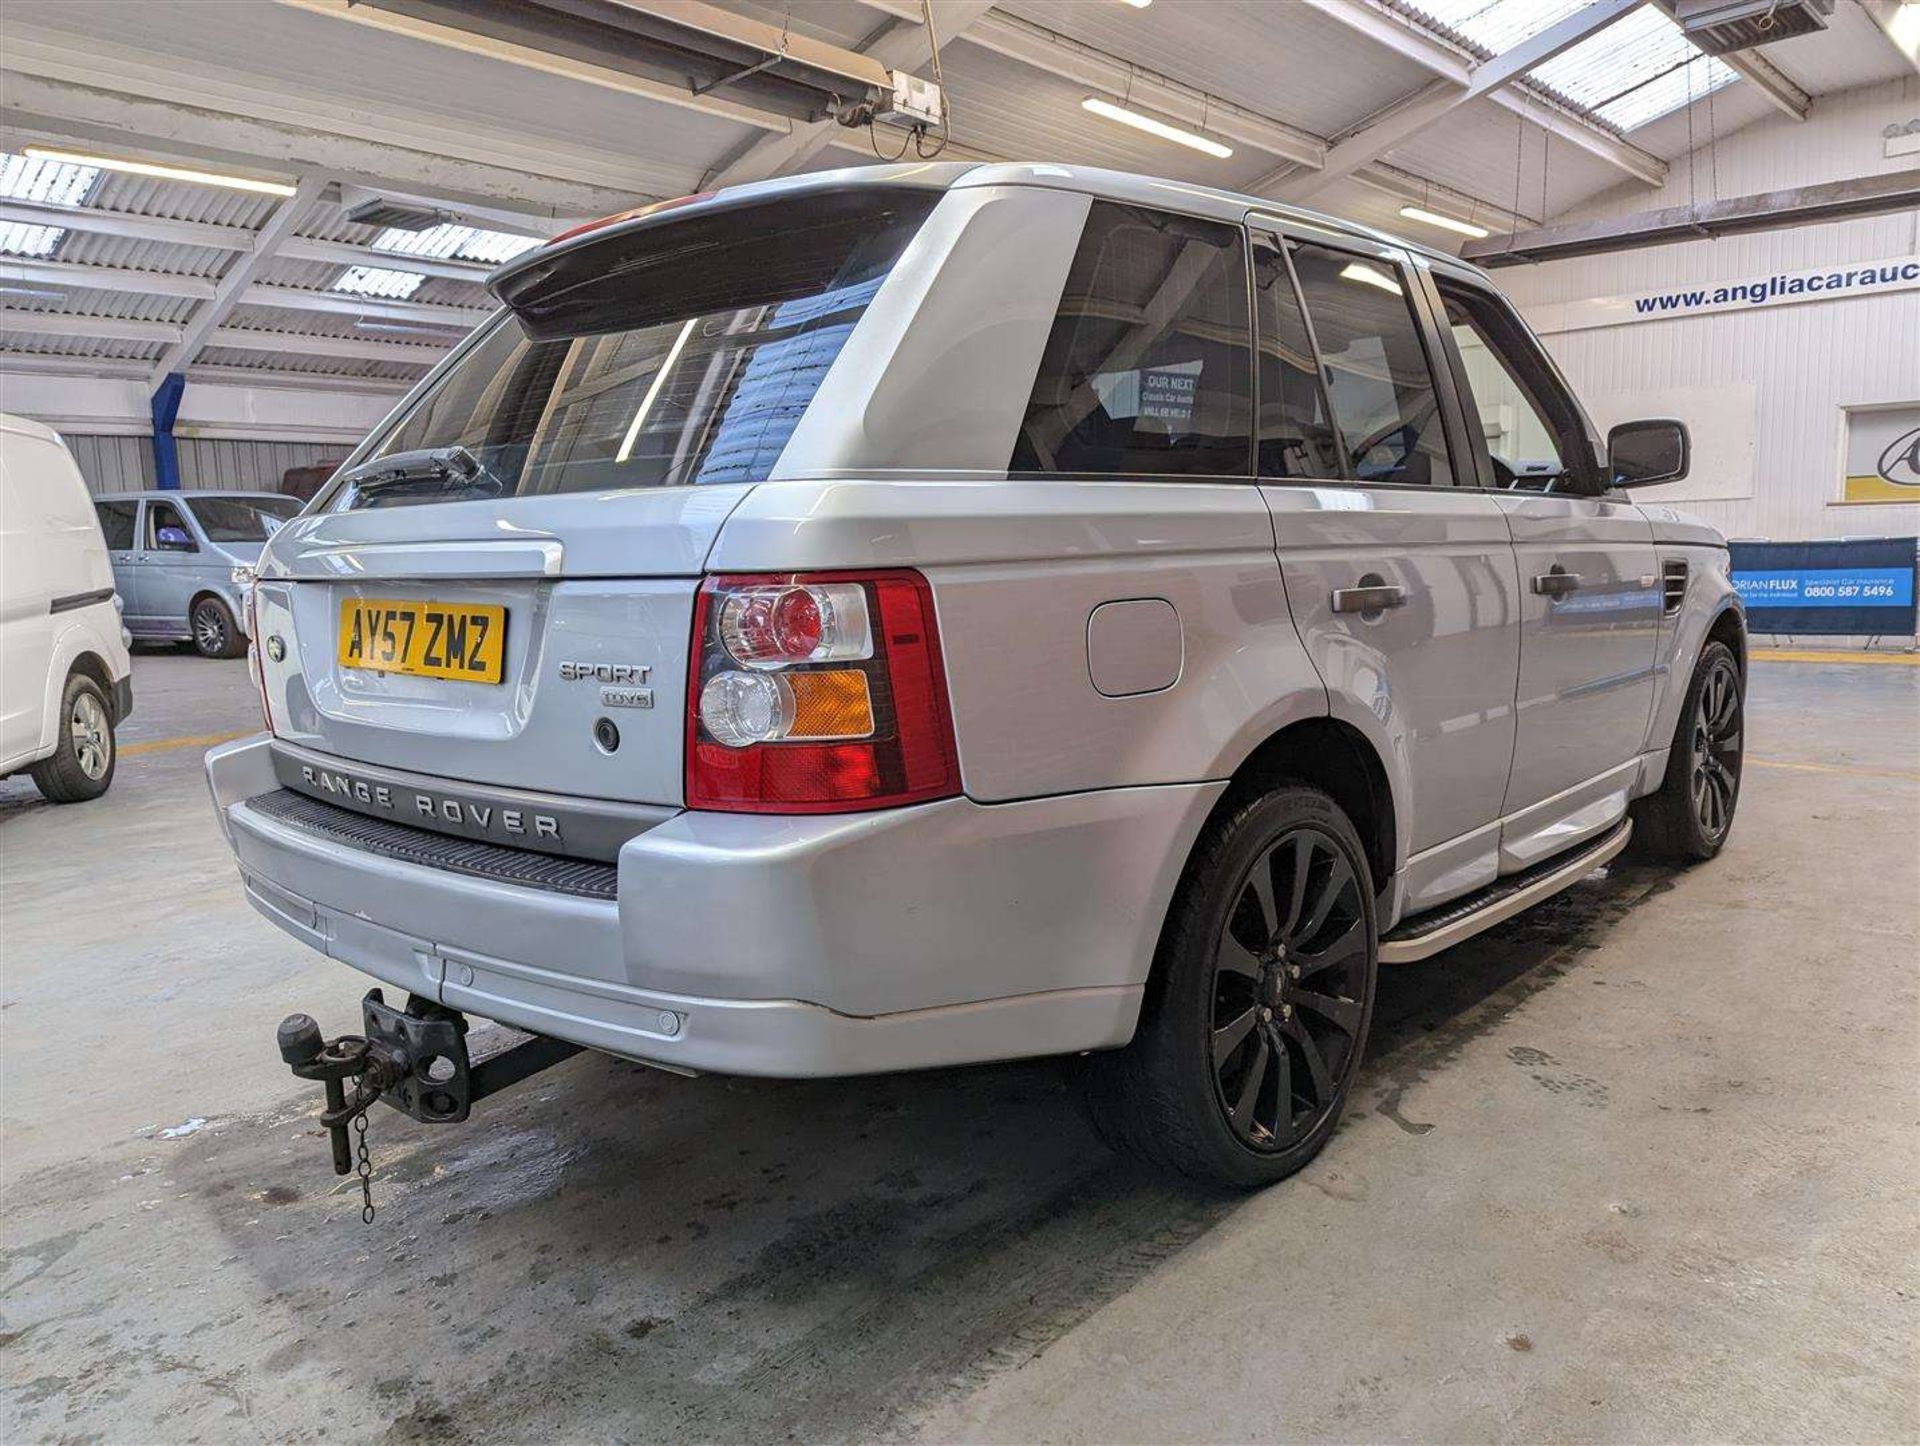 2007 LAND ROVER RANGE ROVER SP HSE TDV8 AUTO - Image 9 of 29